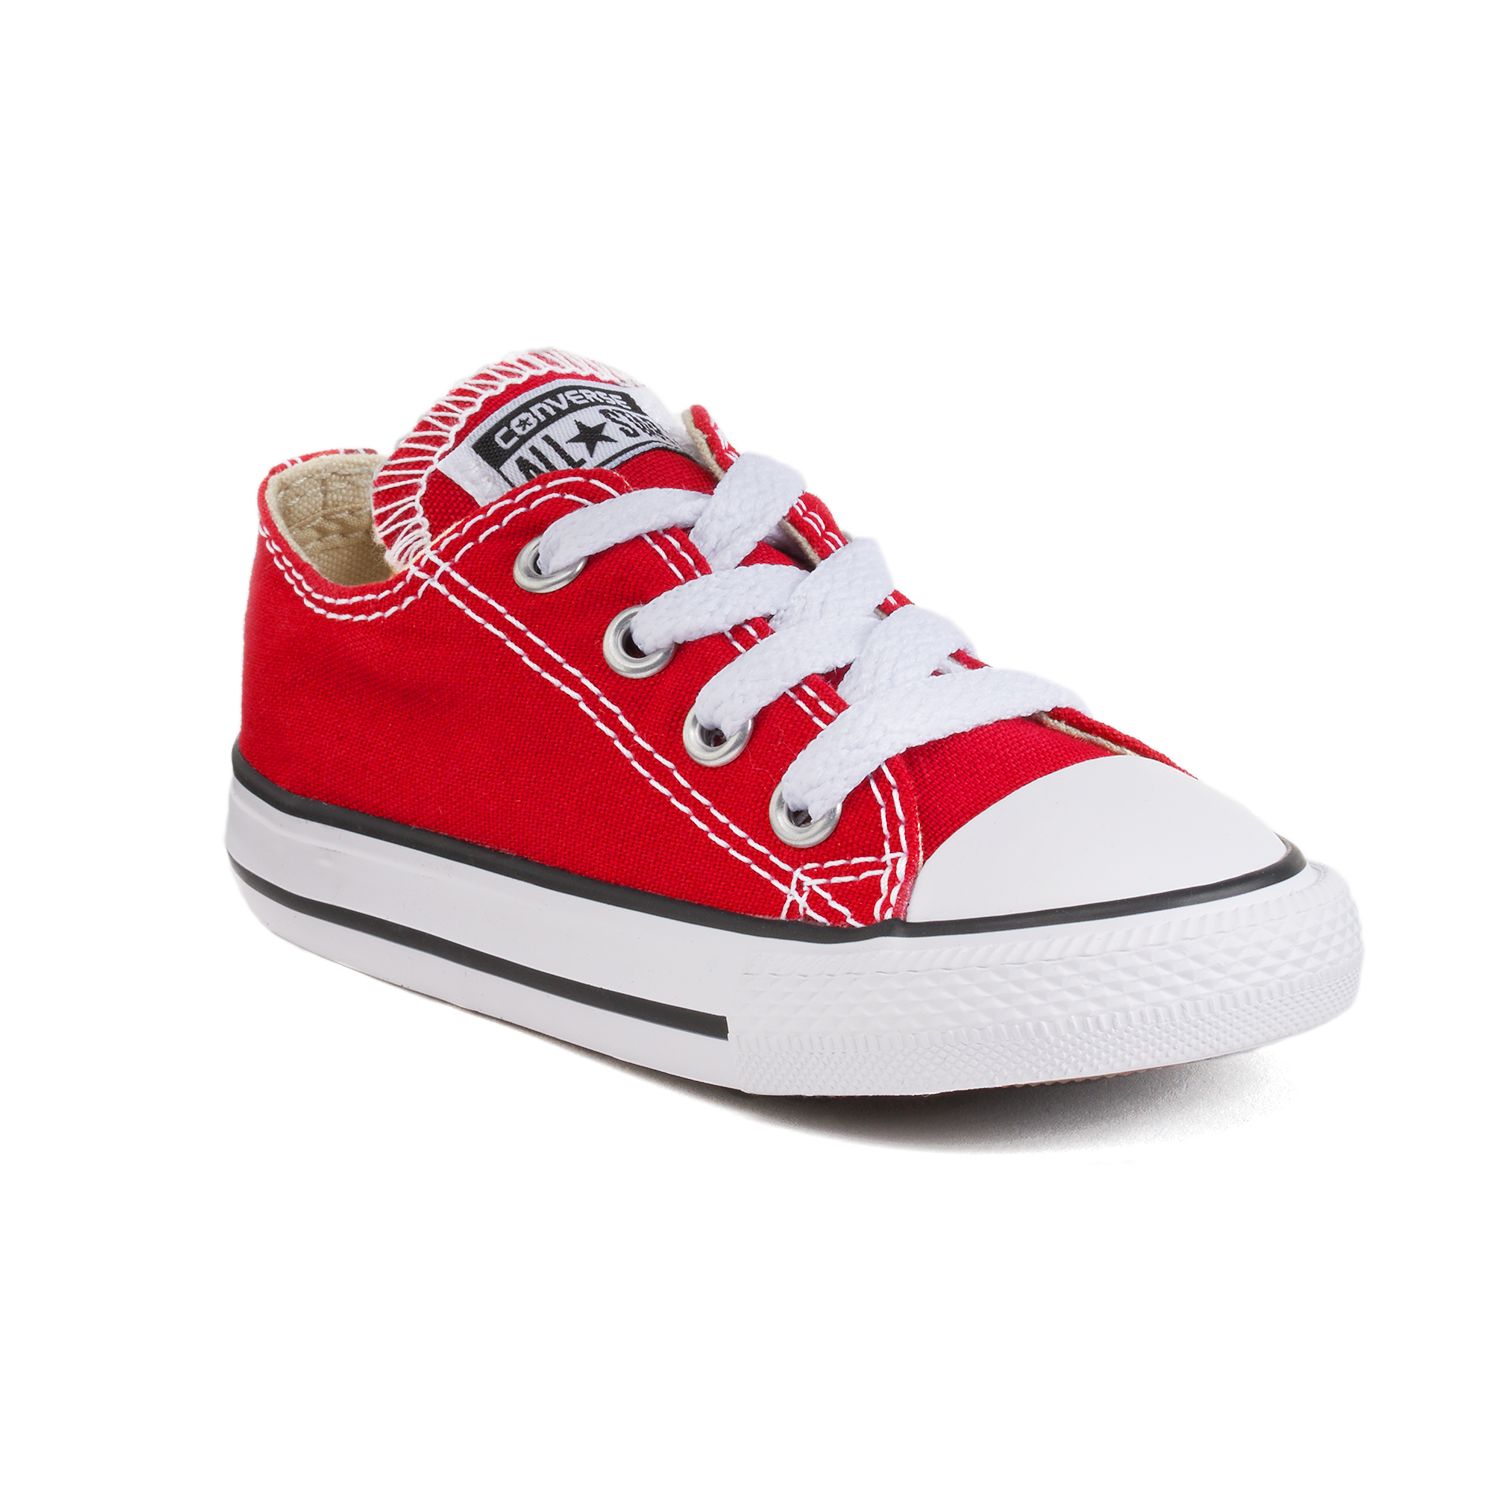 red converse size 8